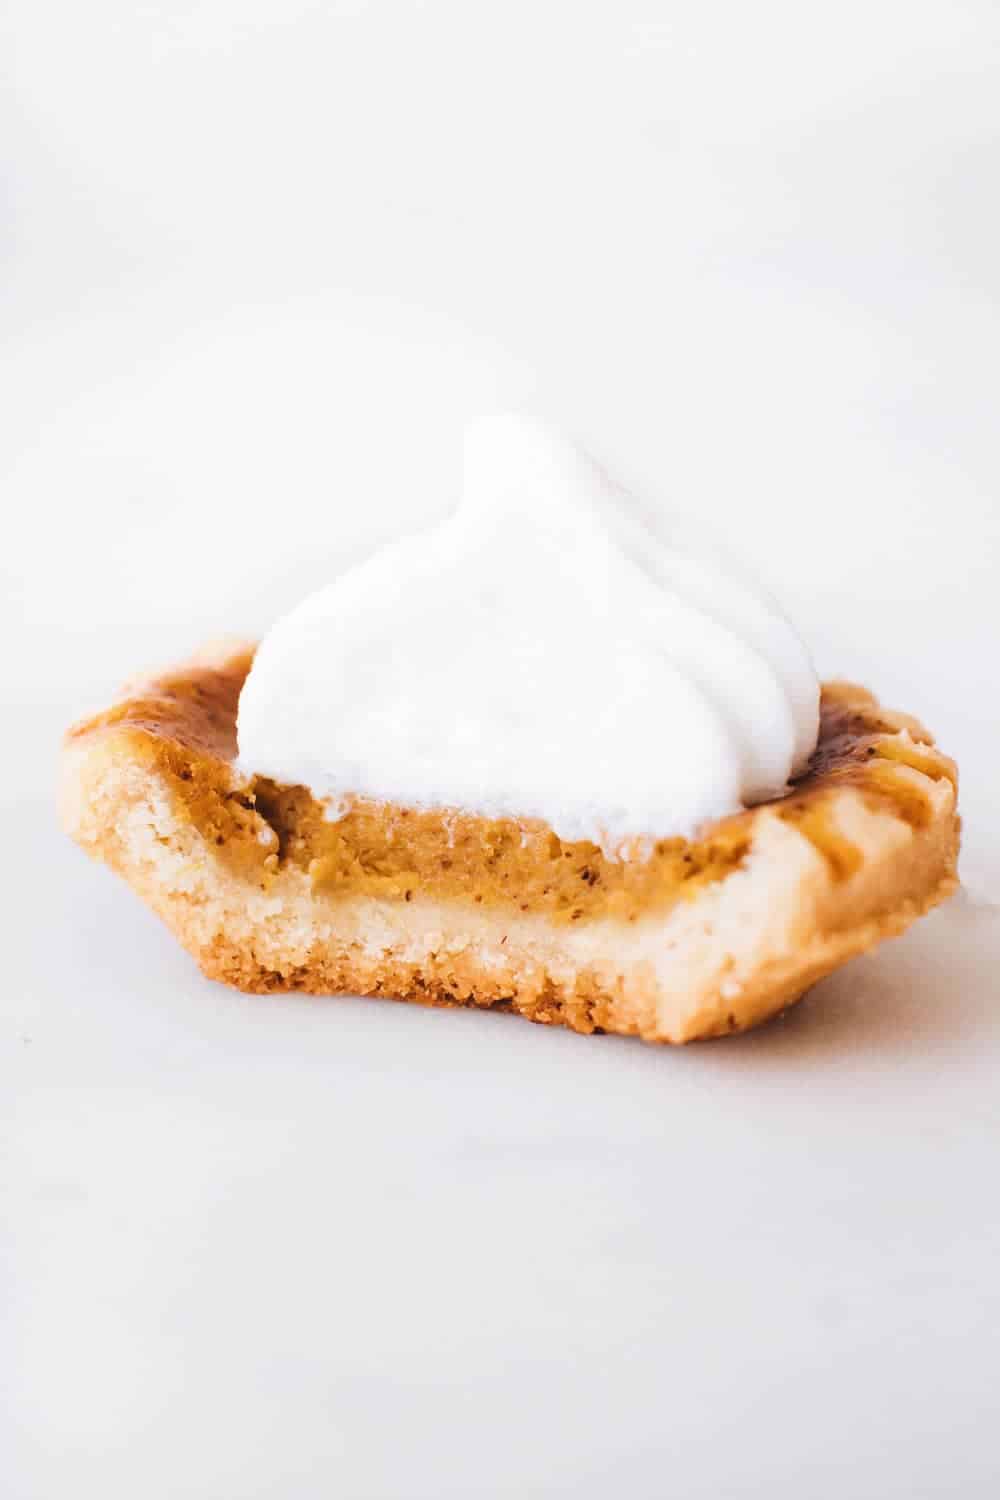 Mini Pumpkin Pies are quickly going to become your new favorite fall dessert. They are simple to make and so fun to eat!